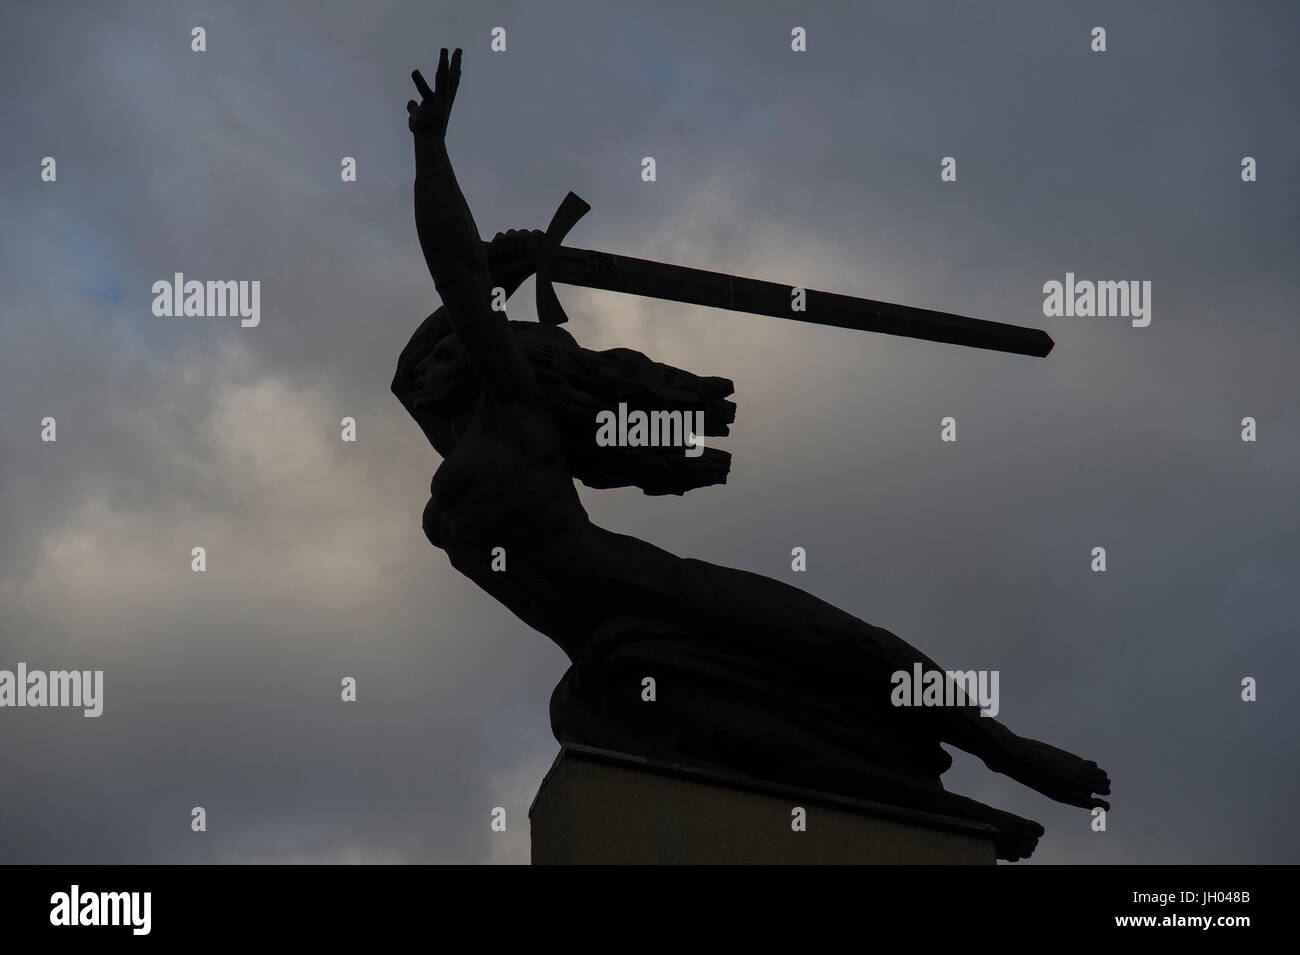 The Monument to the Heroes of Warsaw also known as the Warsaw Nike in Warsaw, Poland. 6 April 2017 © Wojciech Strozyk / Alamy Stock Photo Stock Photo